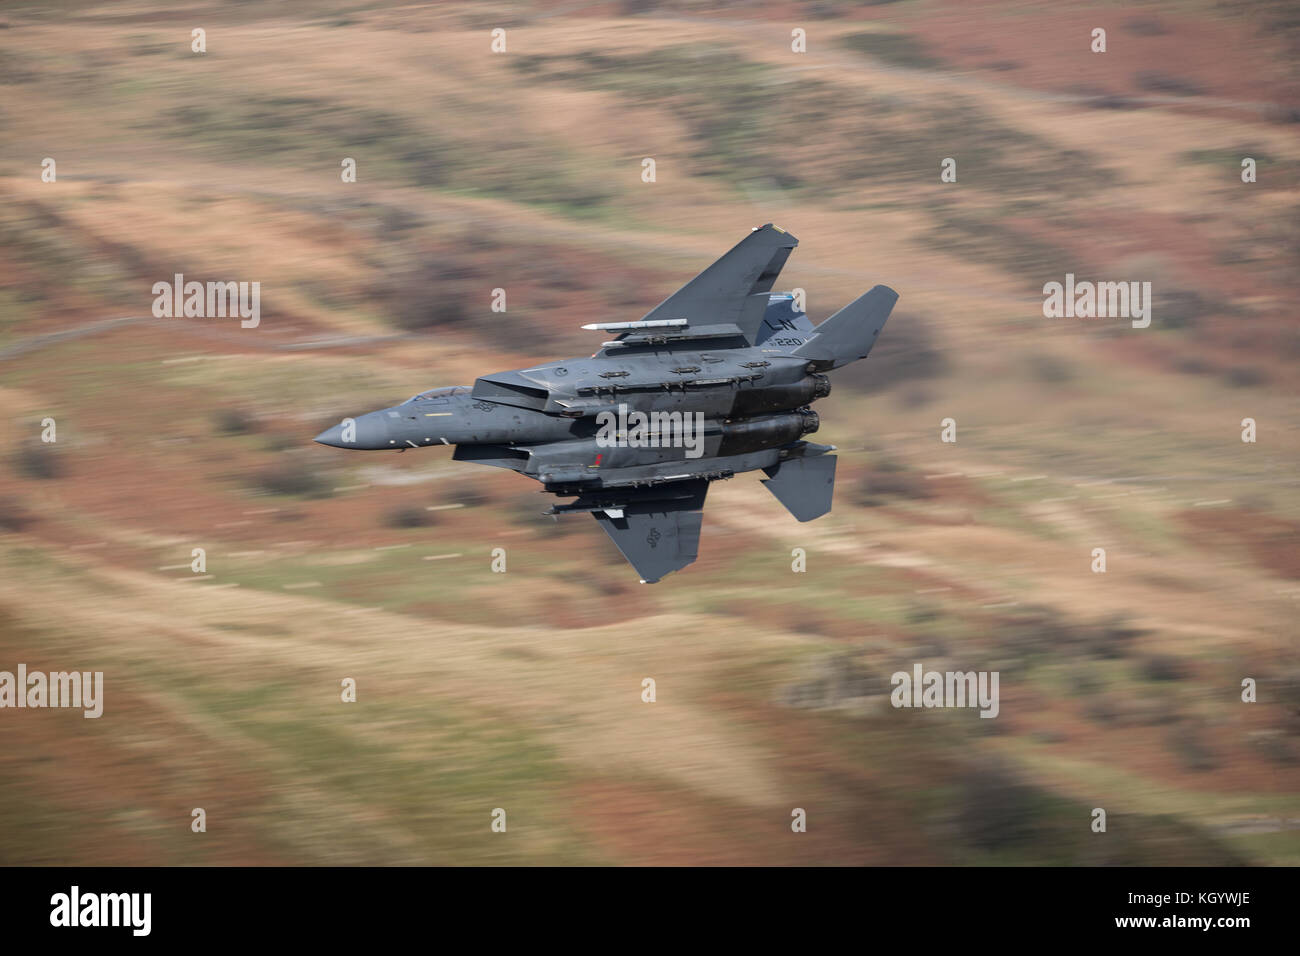 AF 97 220 F-15E Strike Eagle carrying out low flying trainin in Wales. Stock Photo